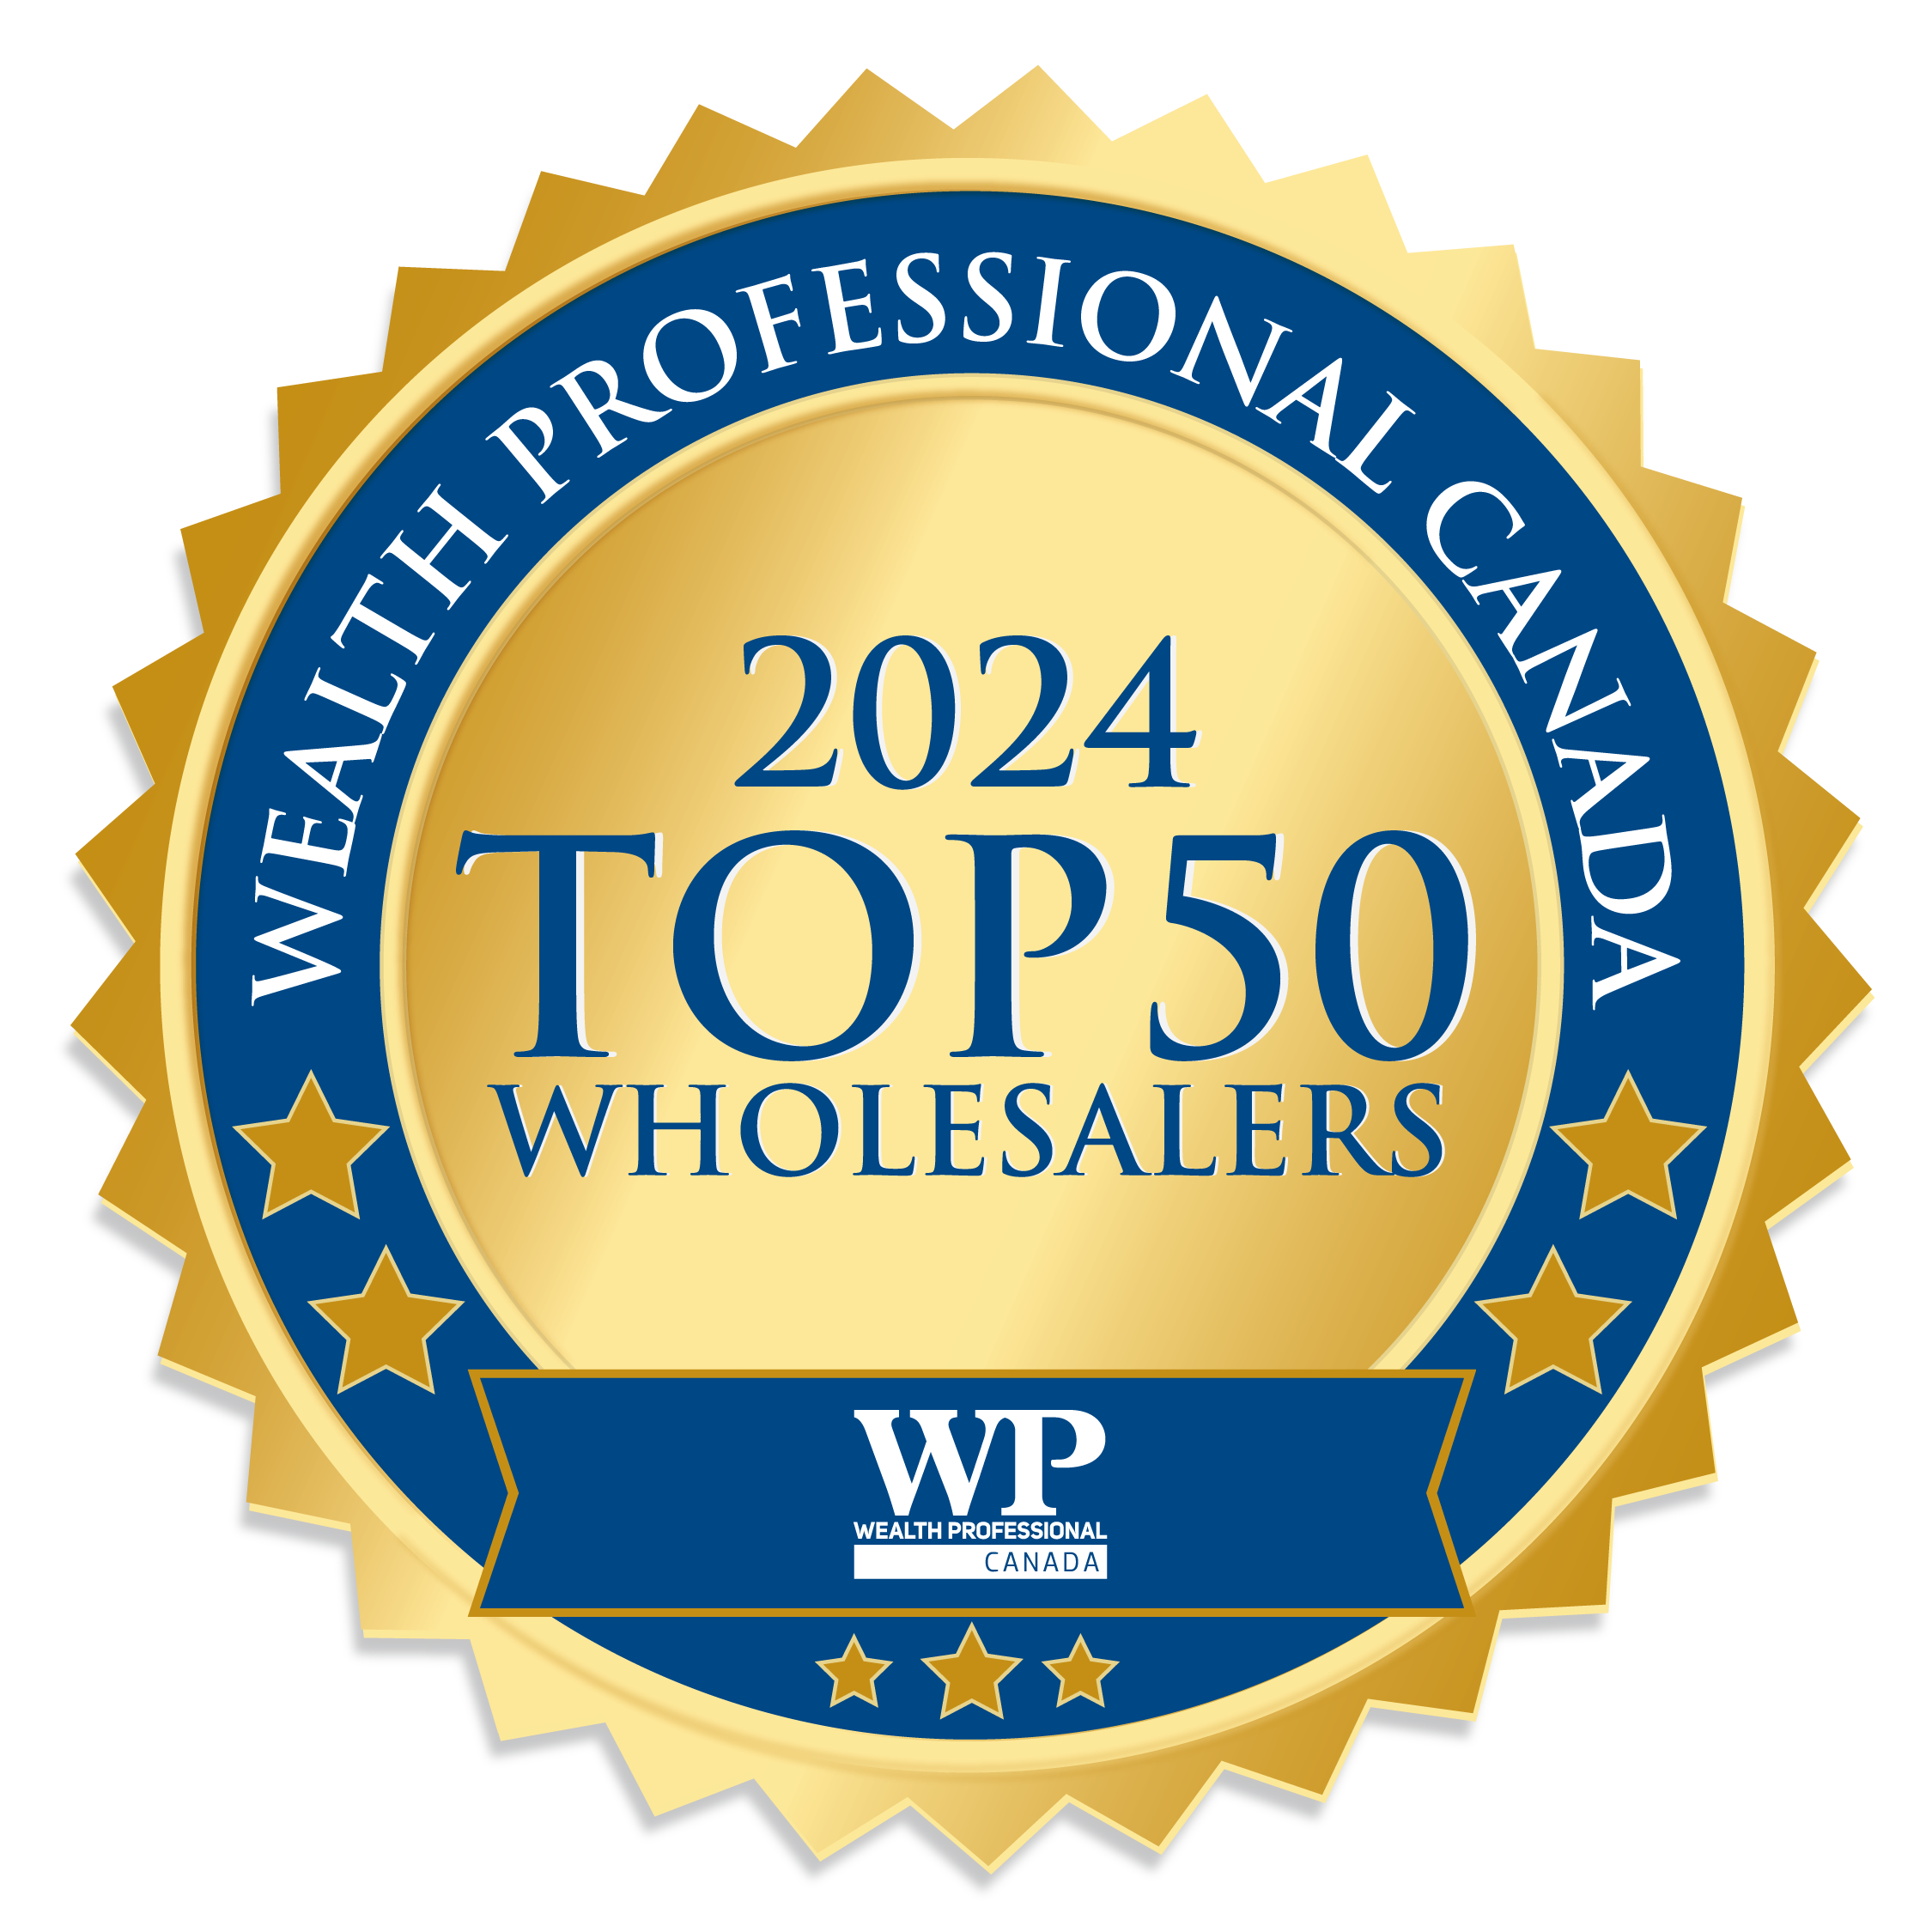 The 50 Best Fund Wholesalers in Canada | 5-Star Wholesalers